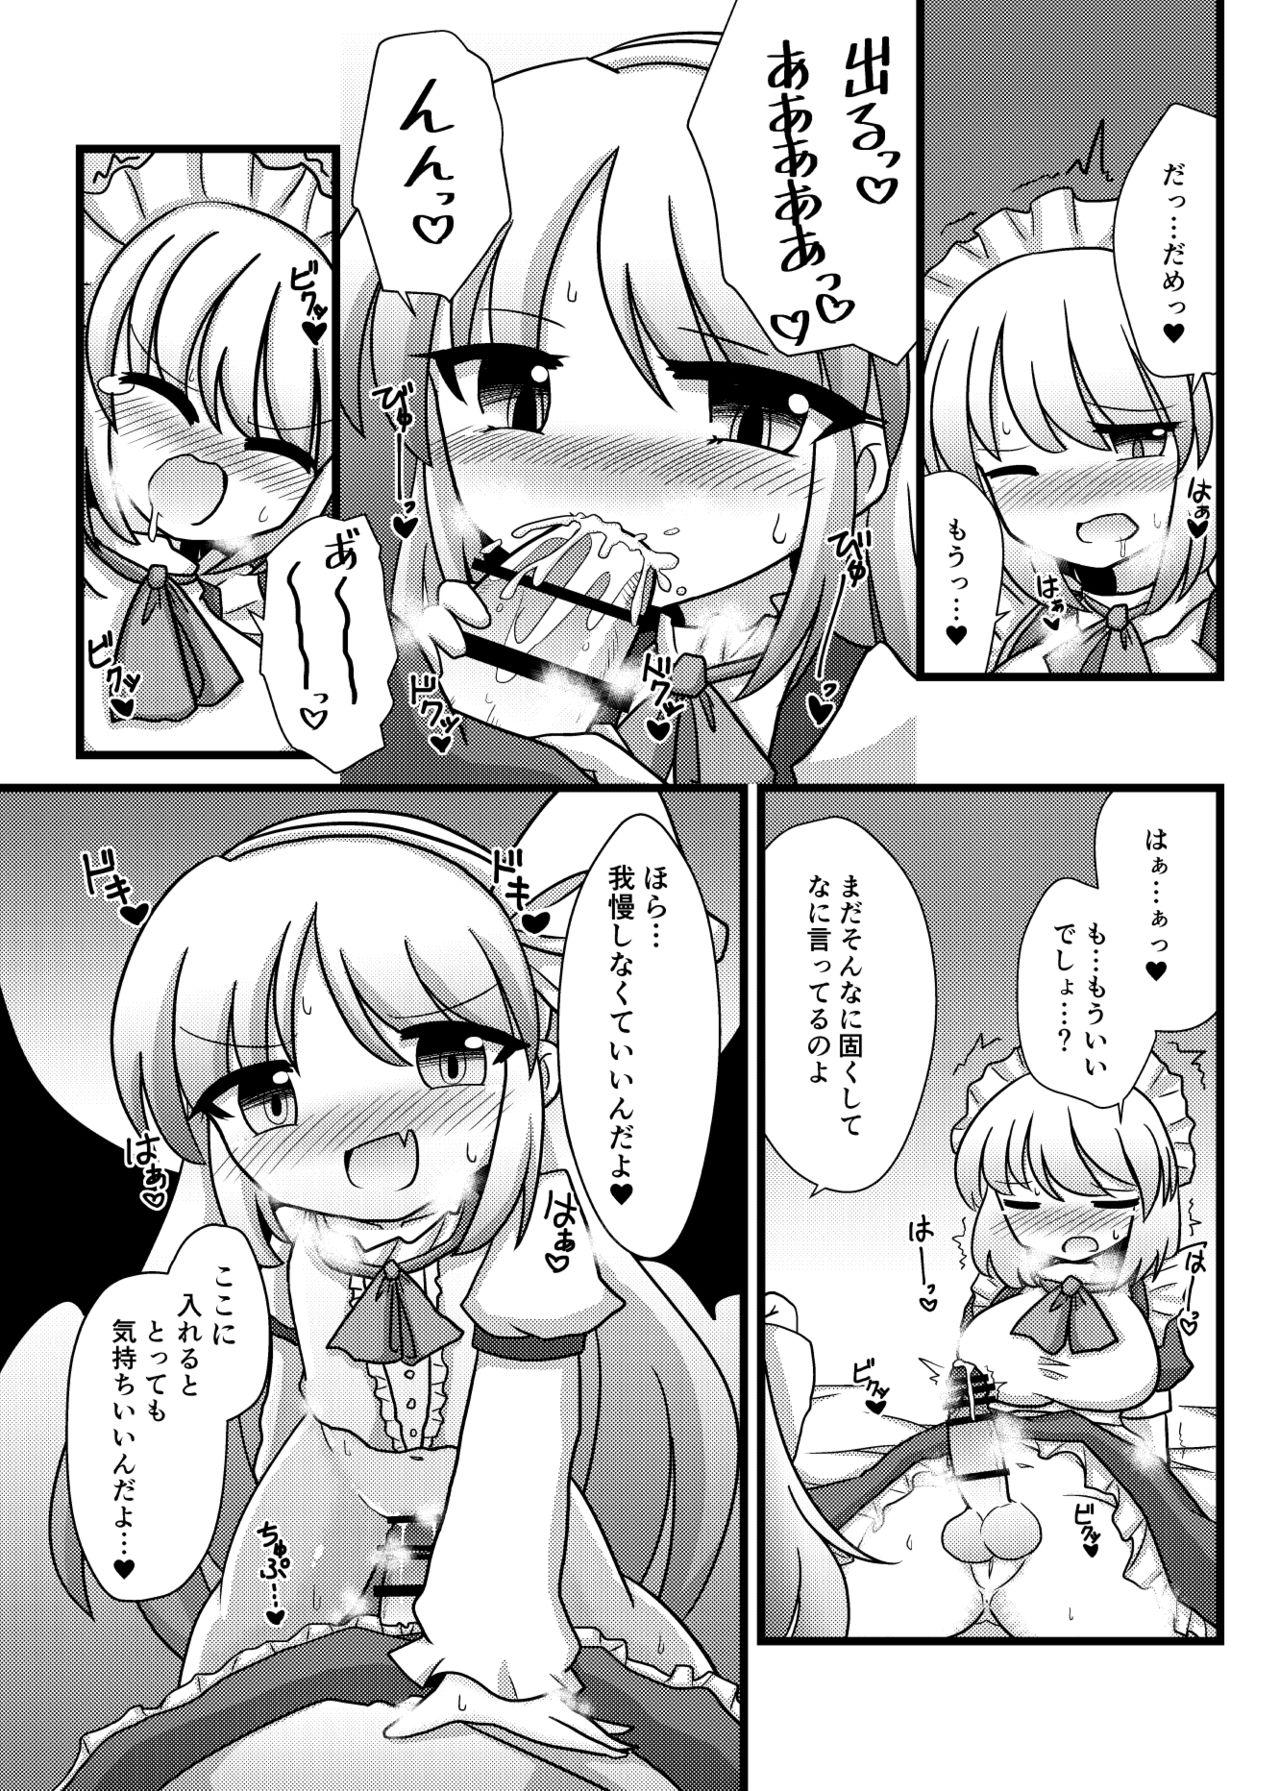 Sexy 旧作エロ合同に寄稿した漫画 - Touhou project Ducha - Page 3